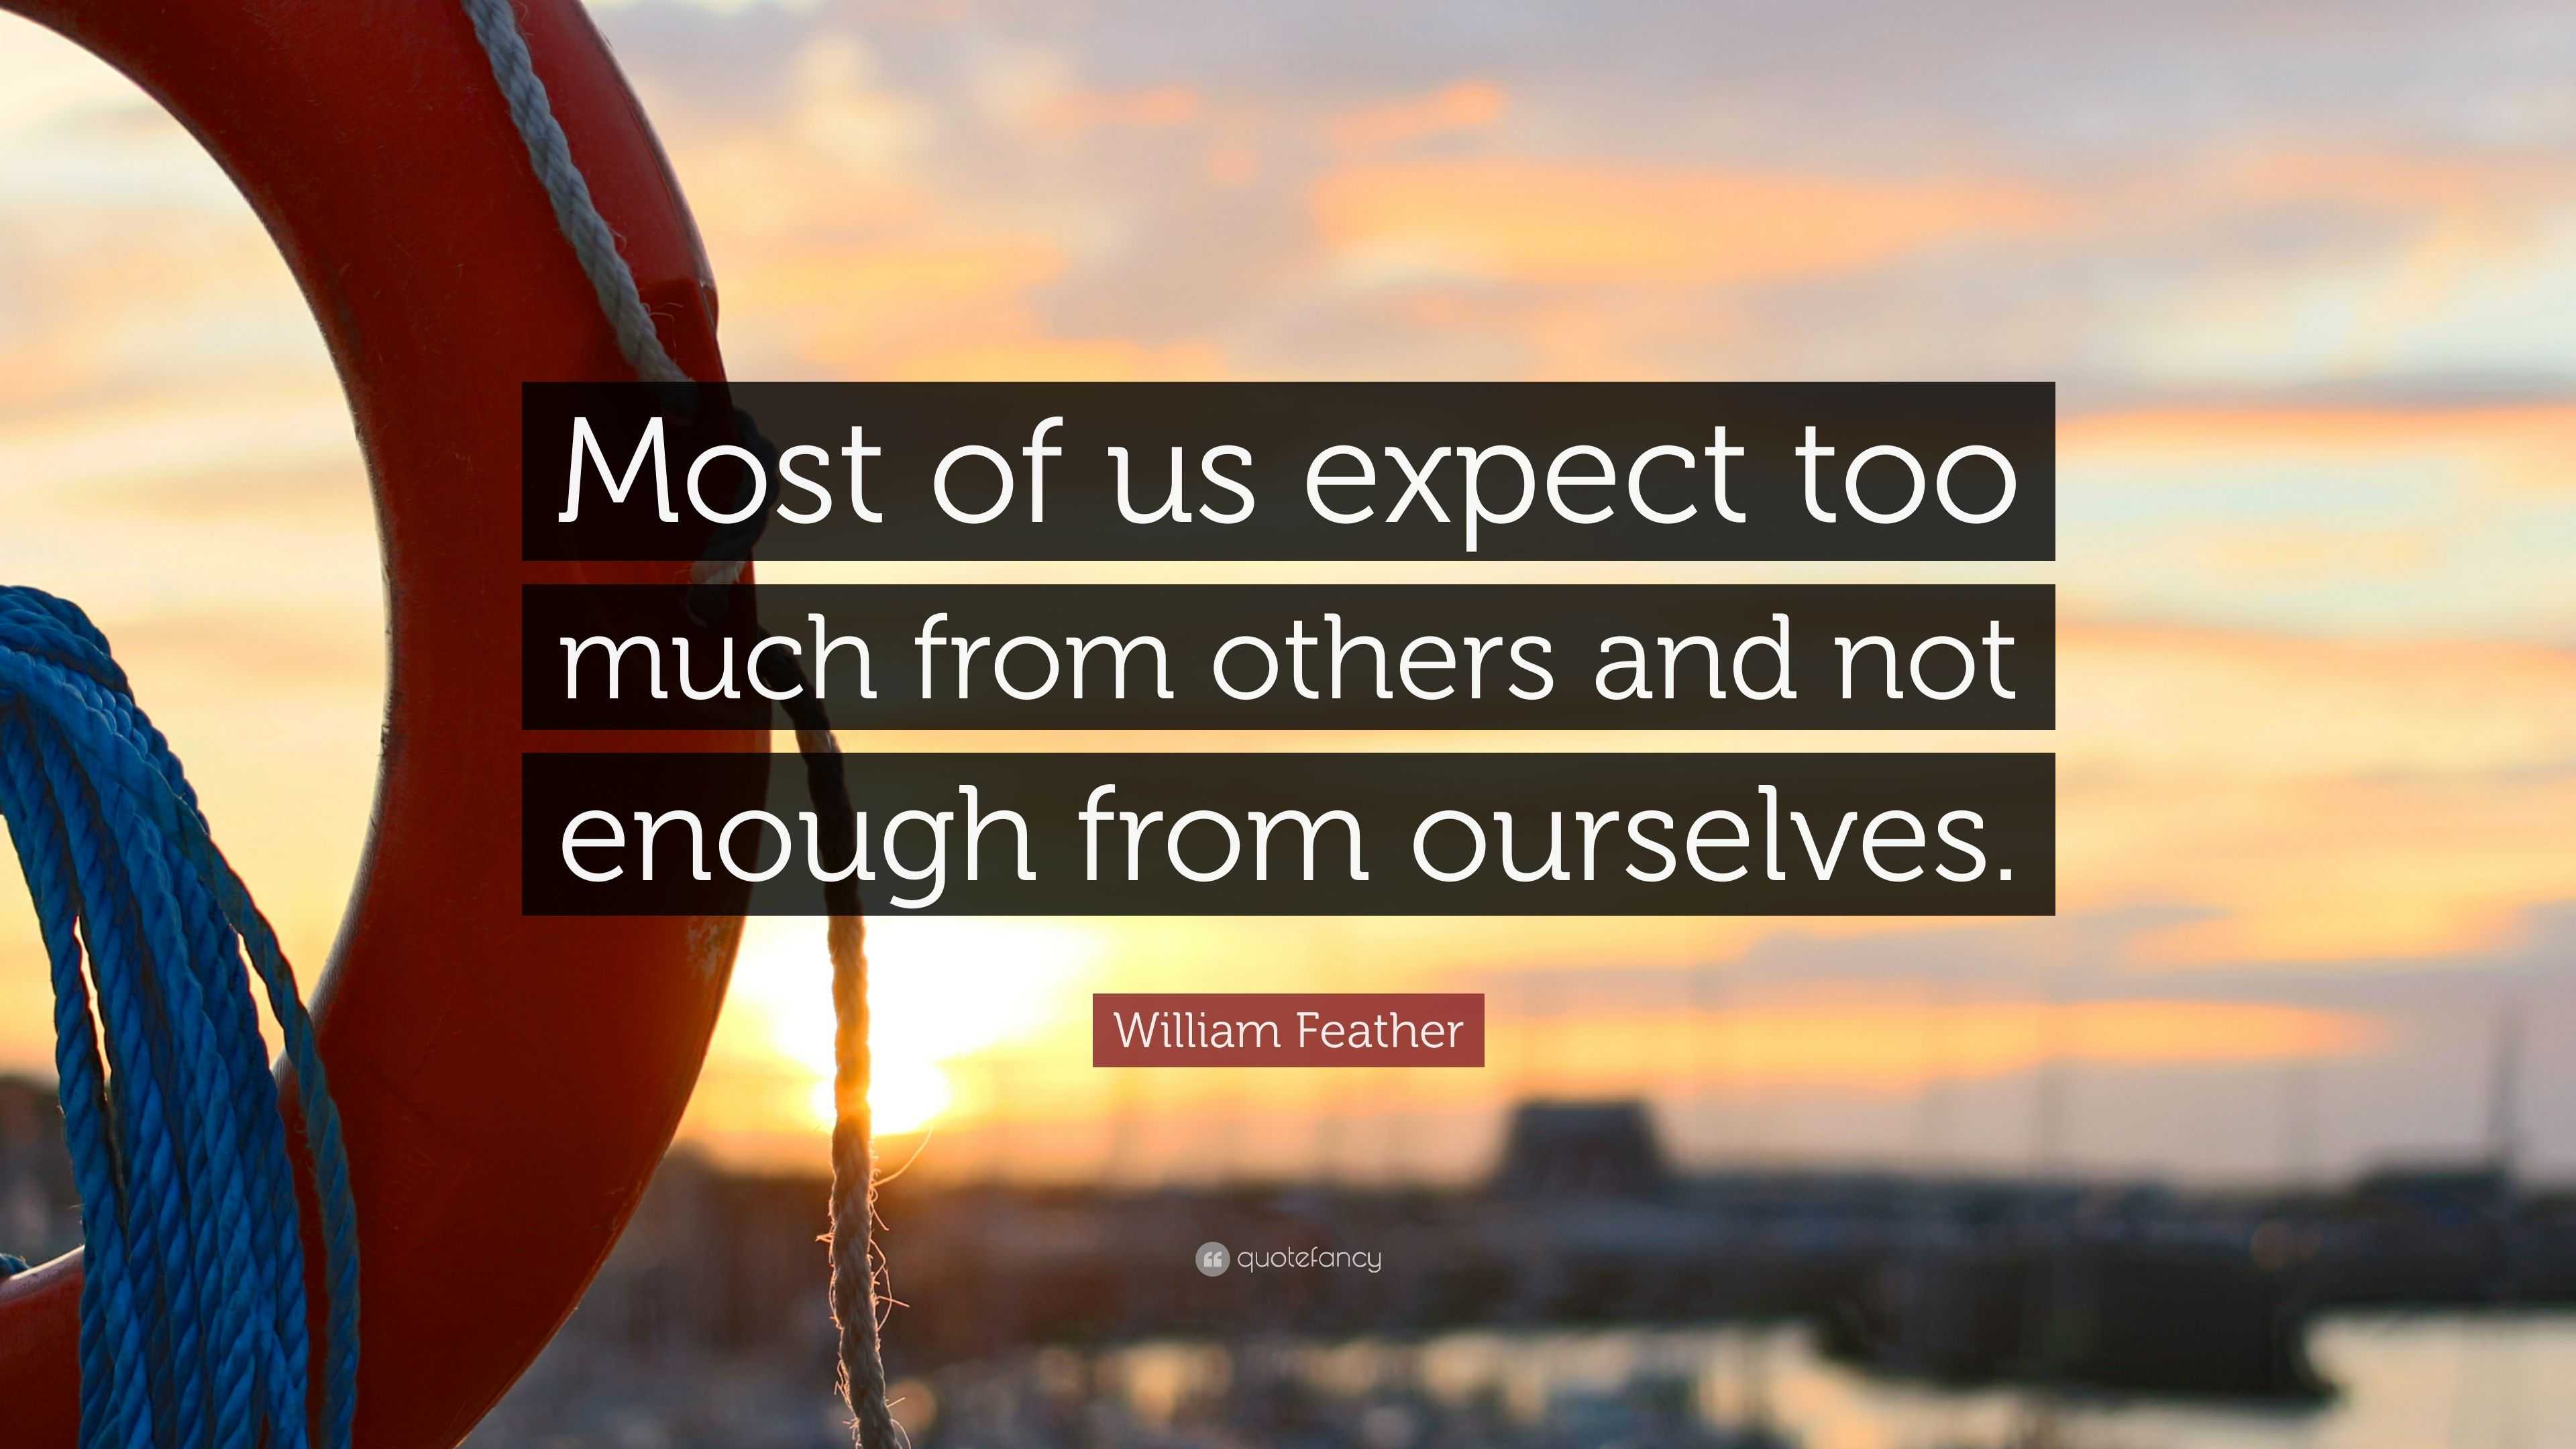 William Feather Quote “Most of us expect too much from others and not enough